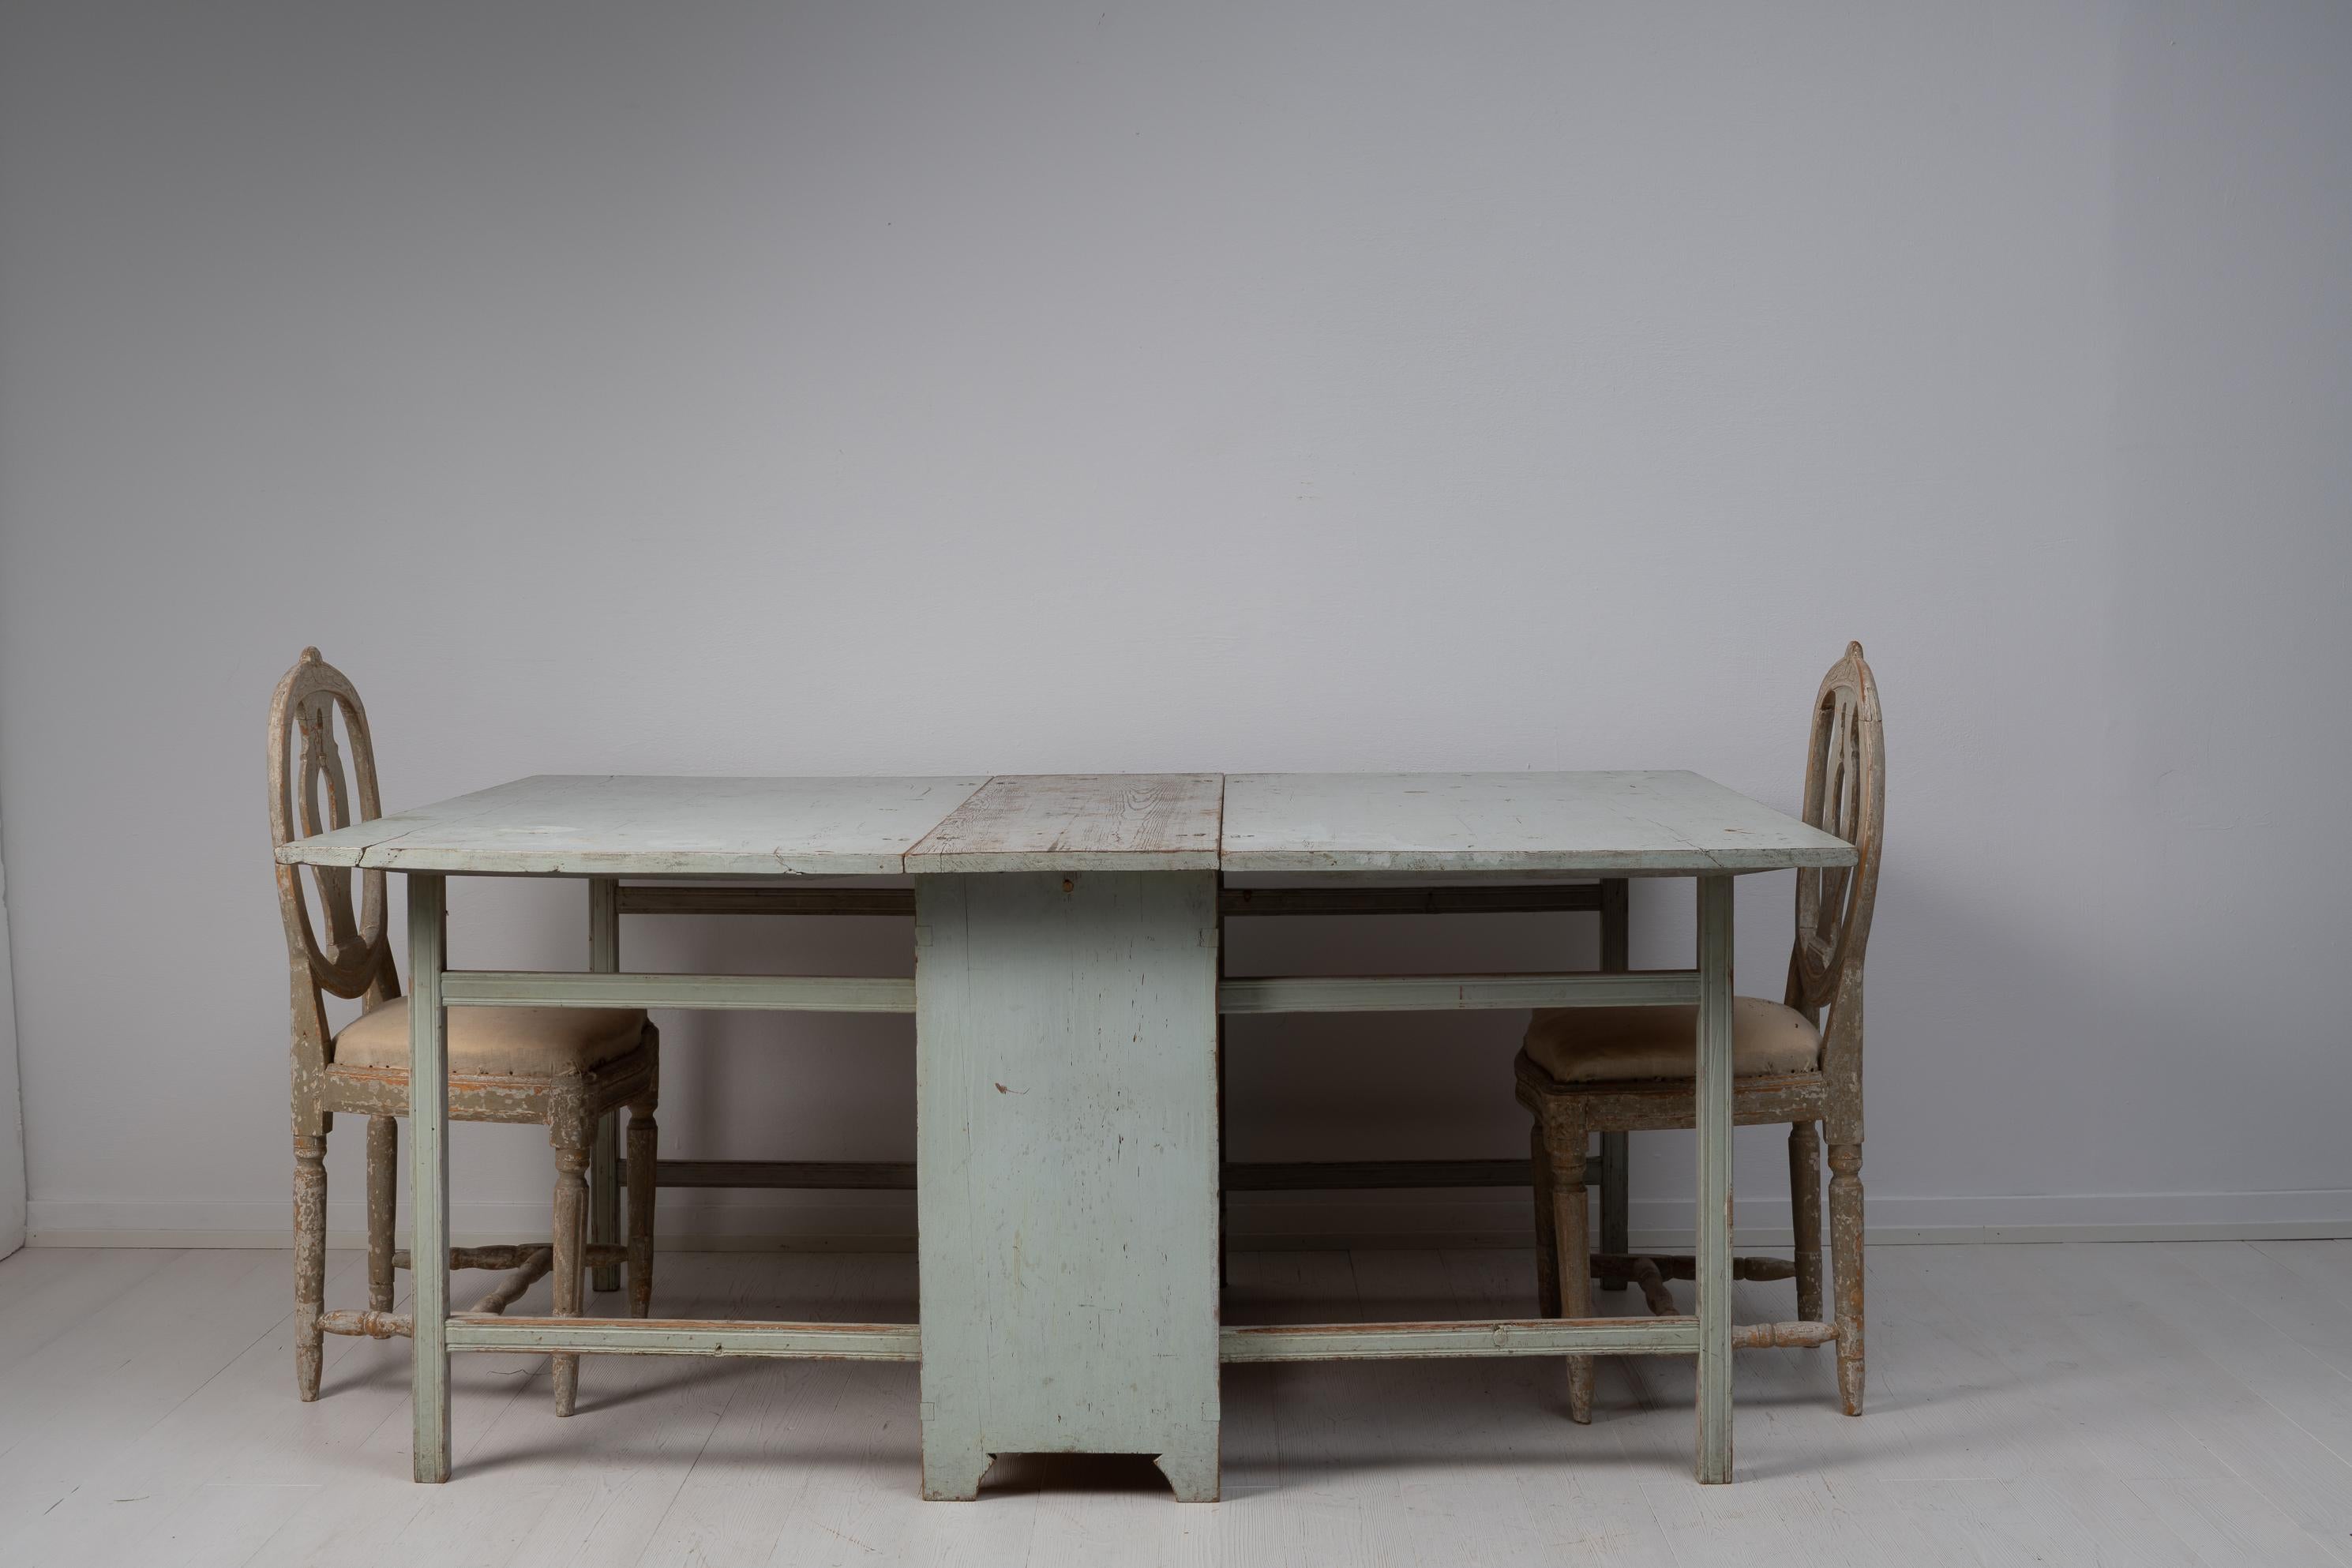 Drop leaf table in gustavian style made around 1810 in northern Sweden. The table is hand-made in Swedish pine and painted in a light grey tone. The paint is the original first layer of paint from the early 1800s. The table is in untouched original